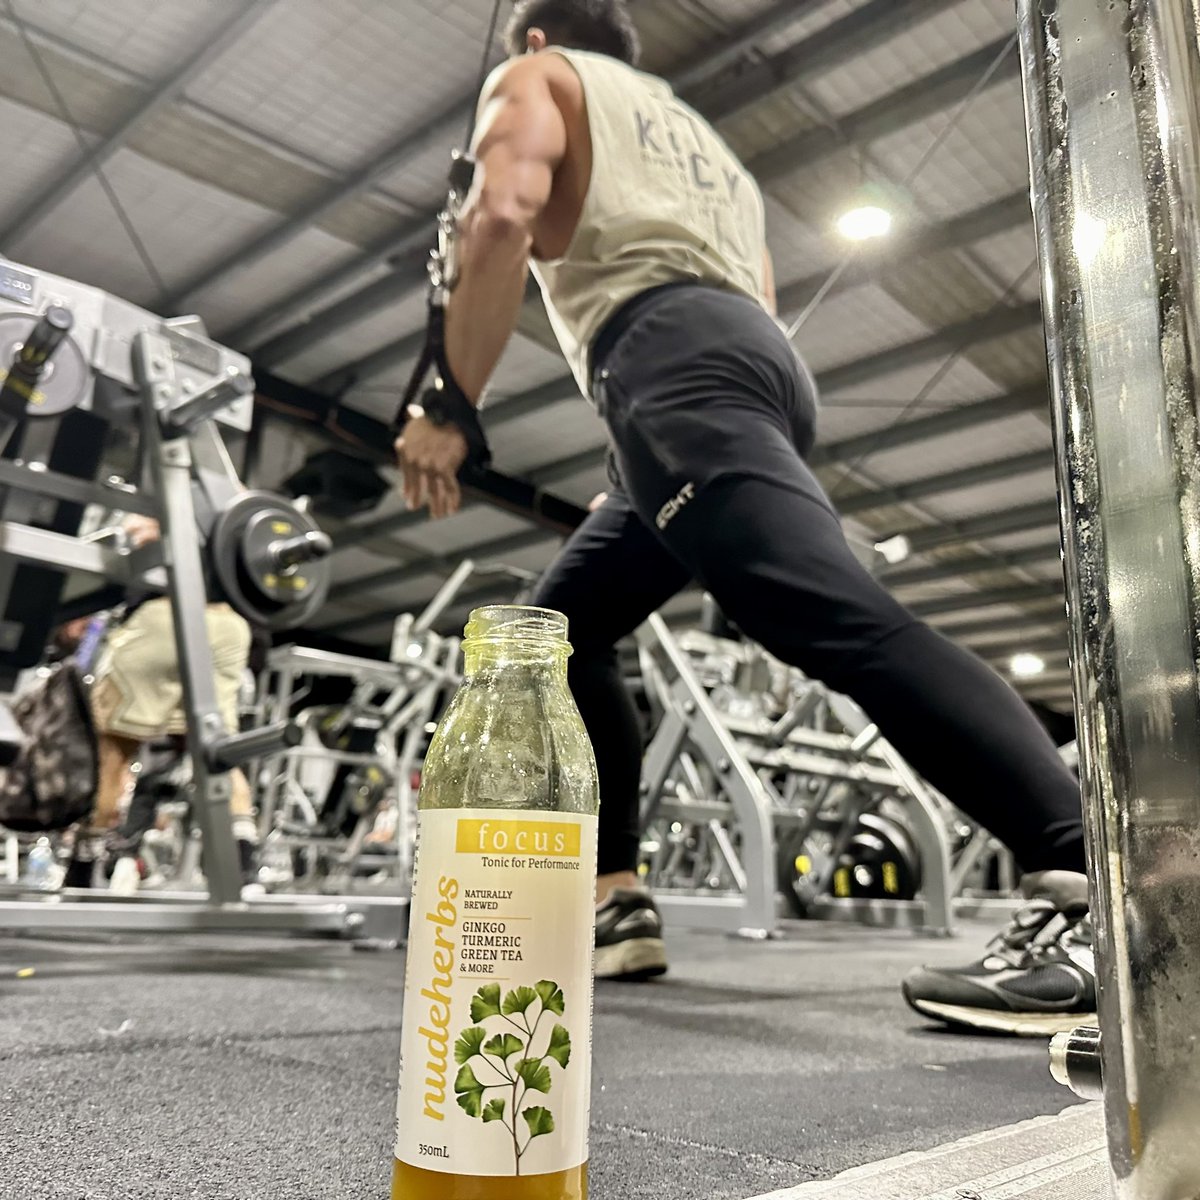 Get ready for your workout - naturally - with nudeherbs focus Tonic 🍀💪. Our focus Tonic is a natural brew of six functional herbs with a refreshing natural peach flavour helping you to maximise your performance while working out🍑. #nudeherbs #herbalmedicine #healthyfood #gym